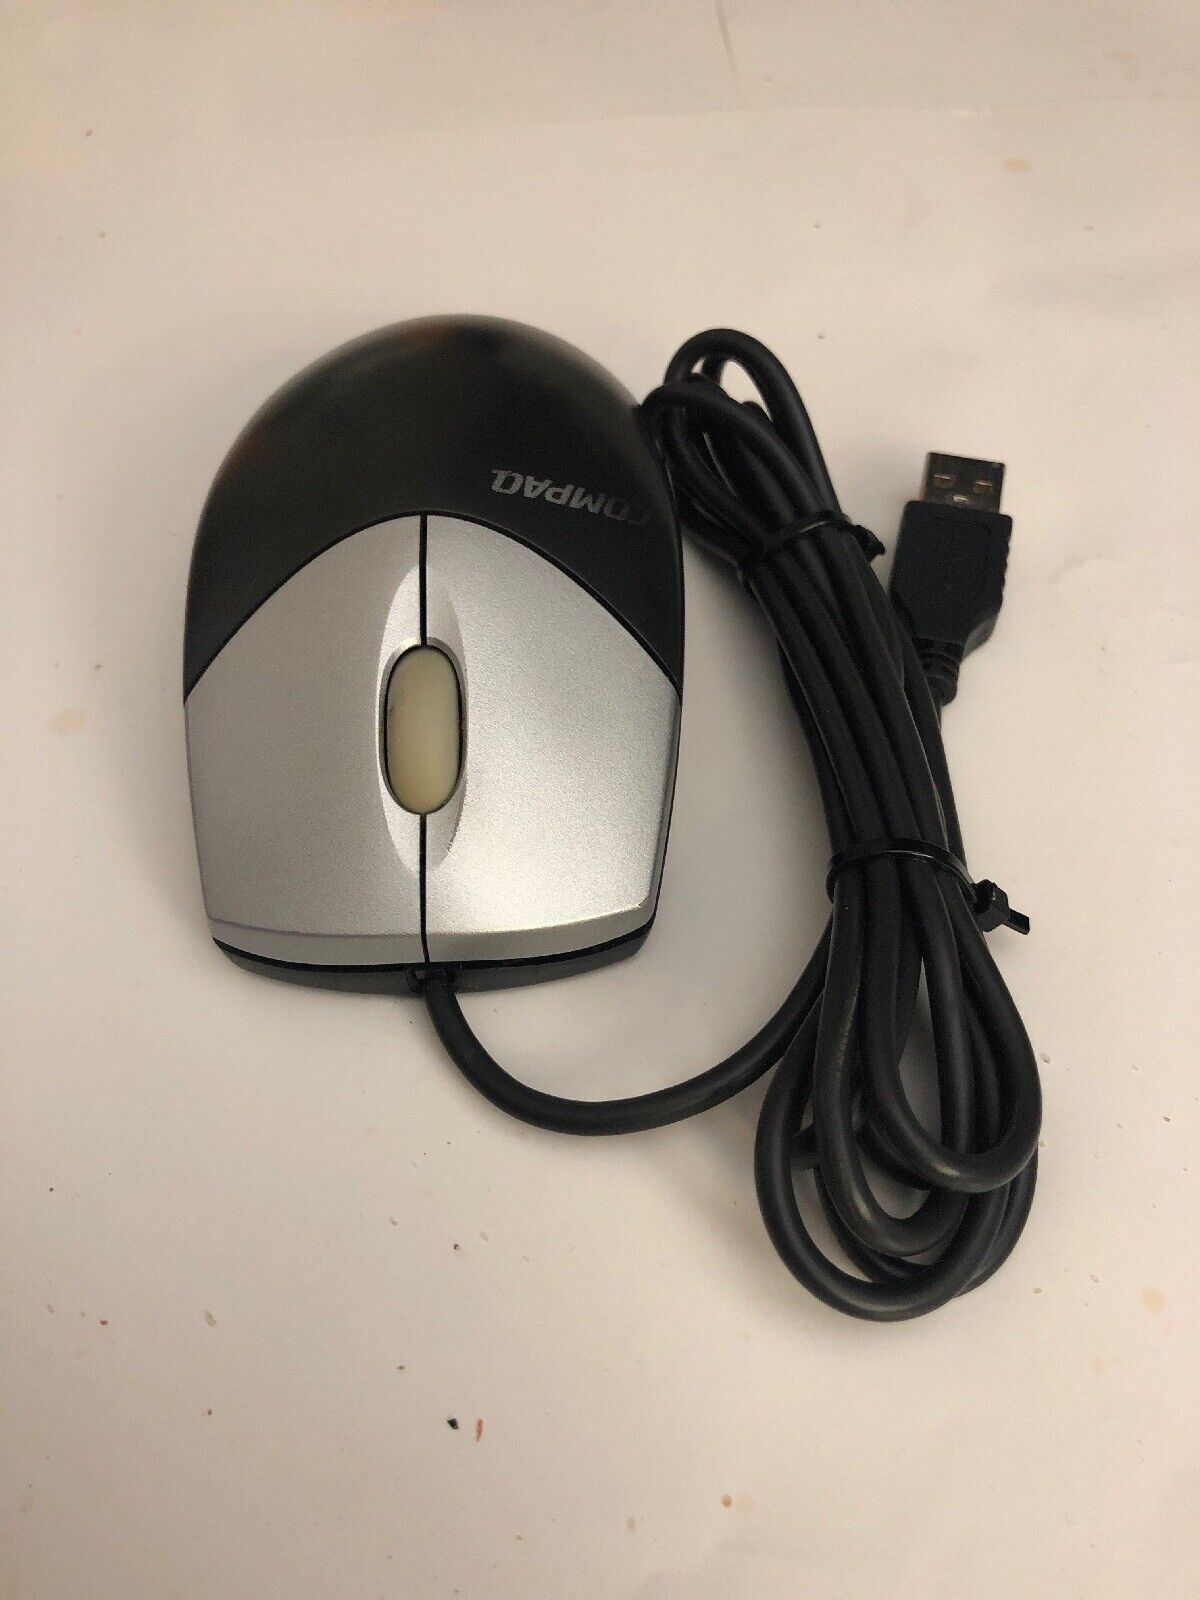 compaq logitech m-ur69 mouse Tested RARE VINTAGE COLLECTIBLE SHIPS N 24 HOURS